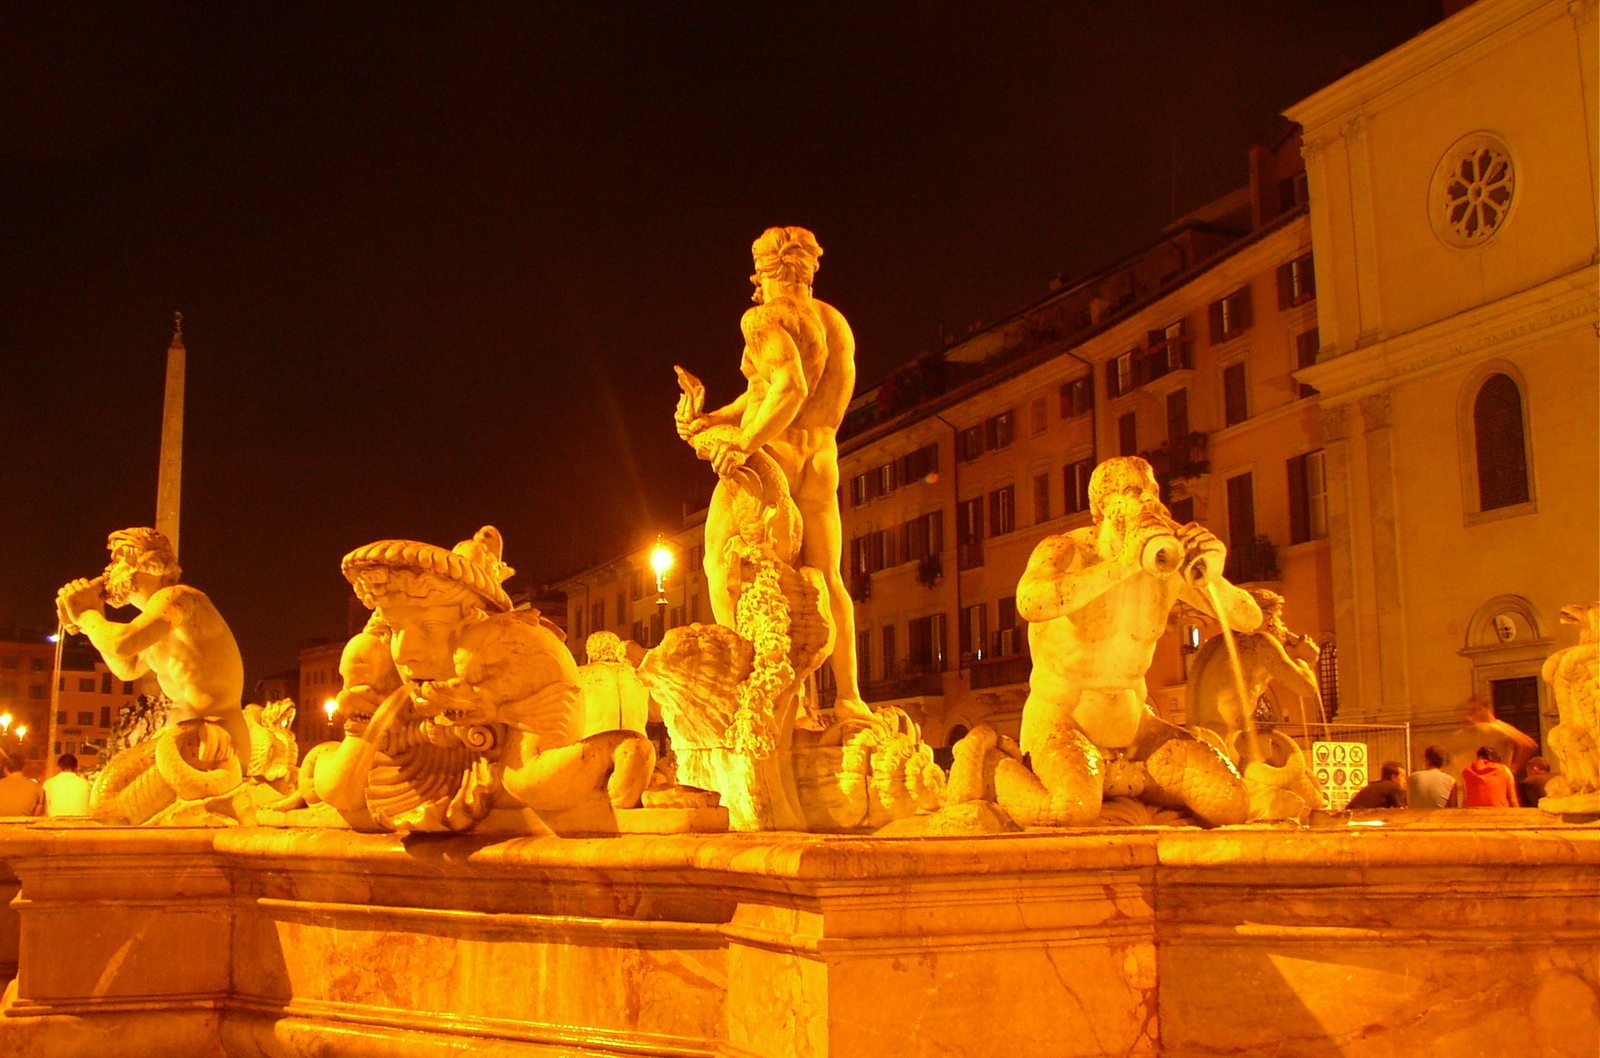 a fountain that is surrounded by some statues